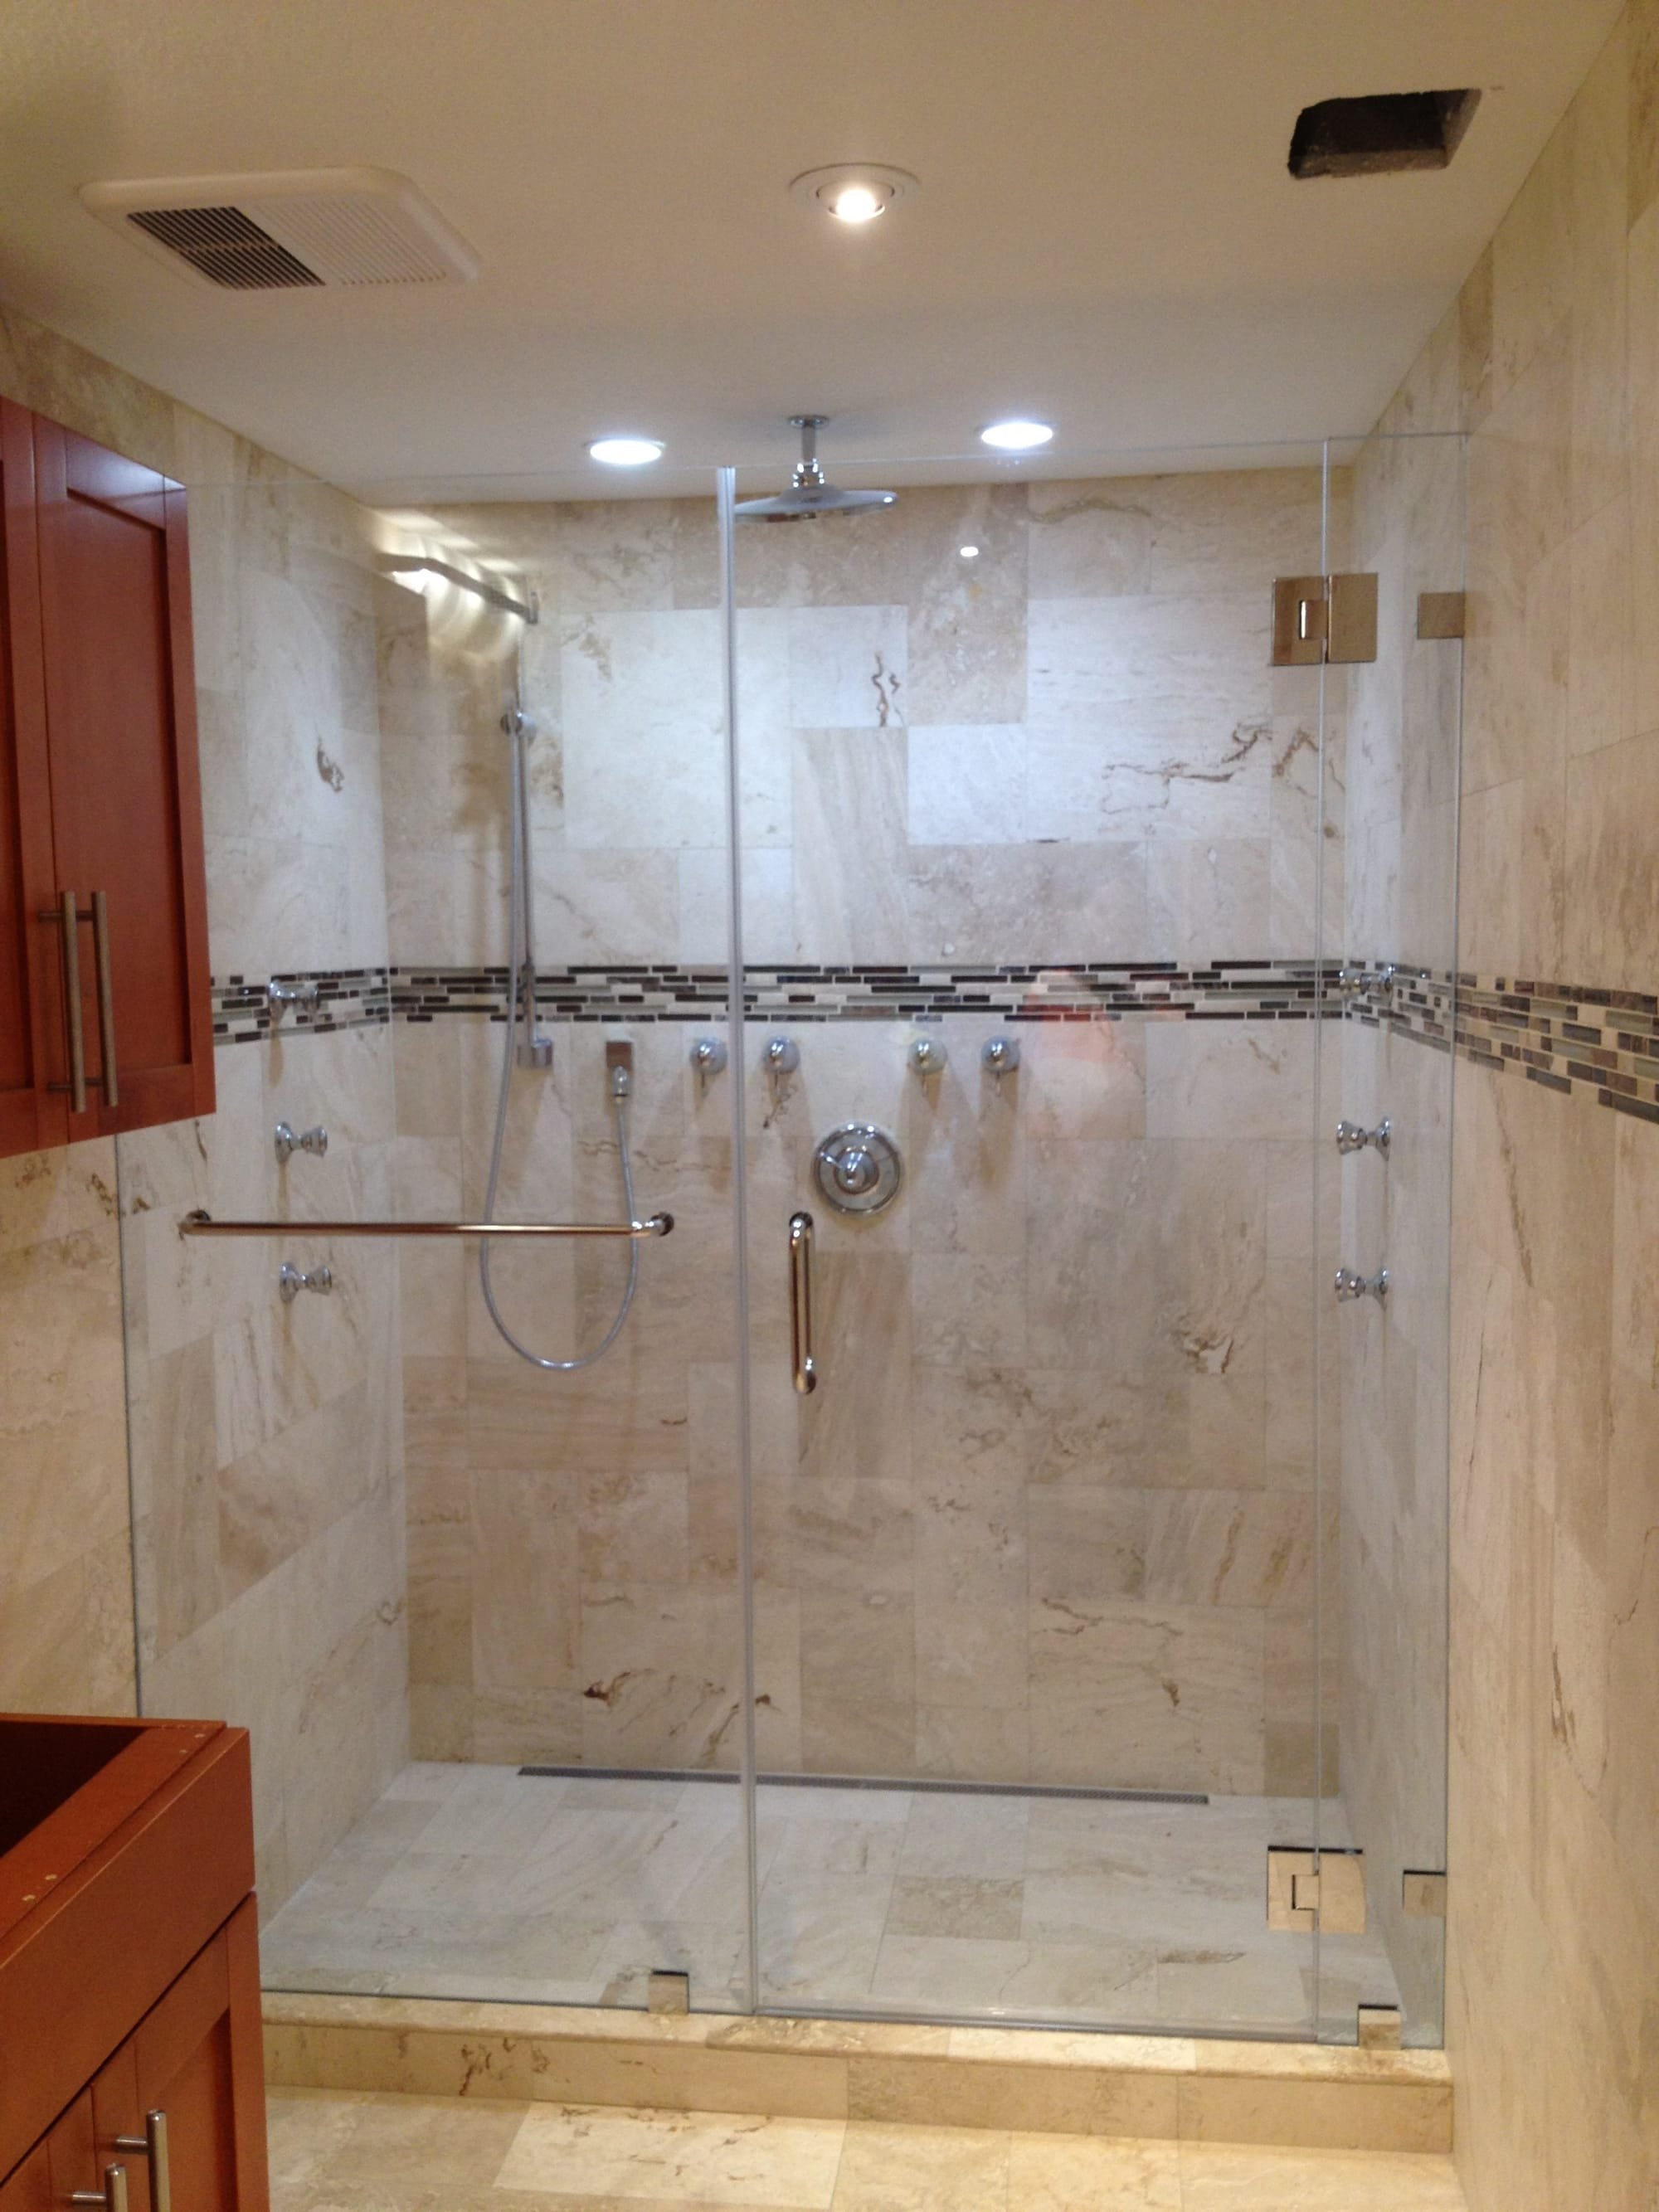 Glass Shower Doors Miami Makes The Place Look More Functional!